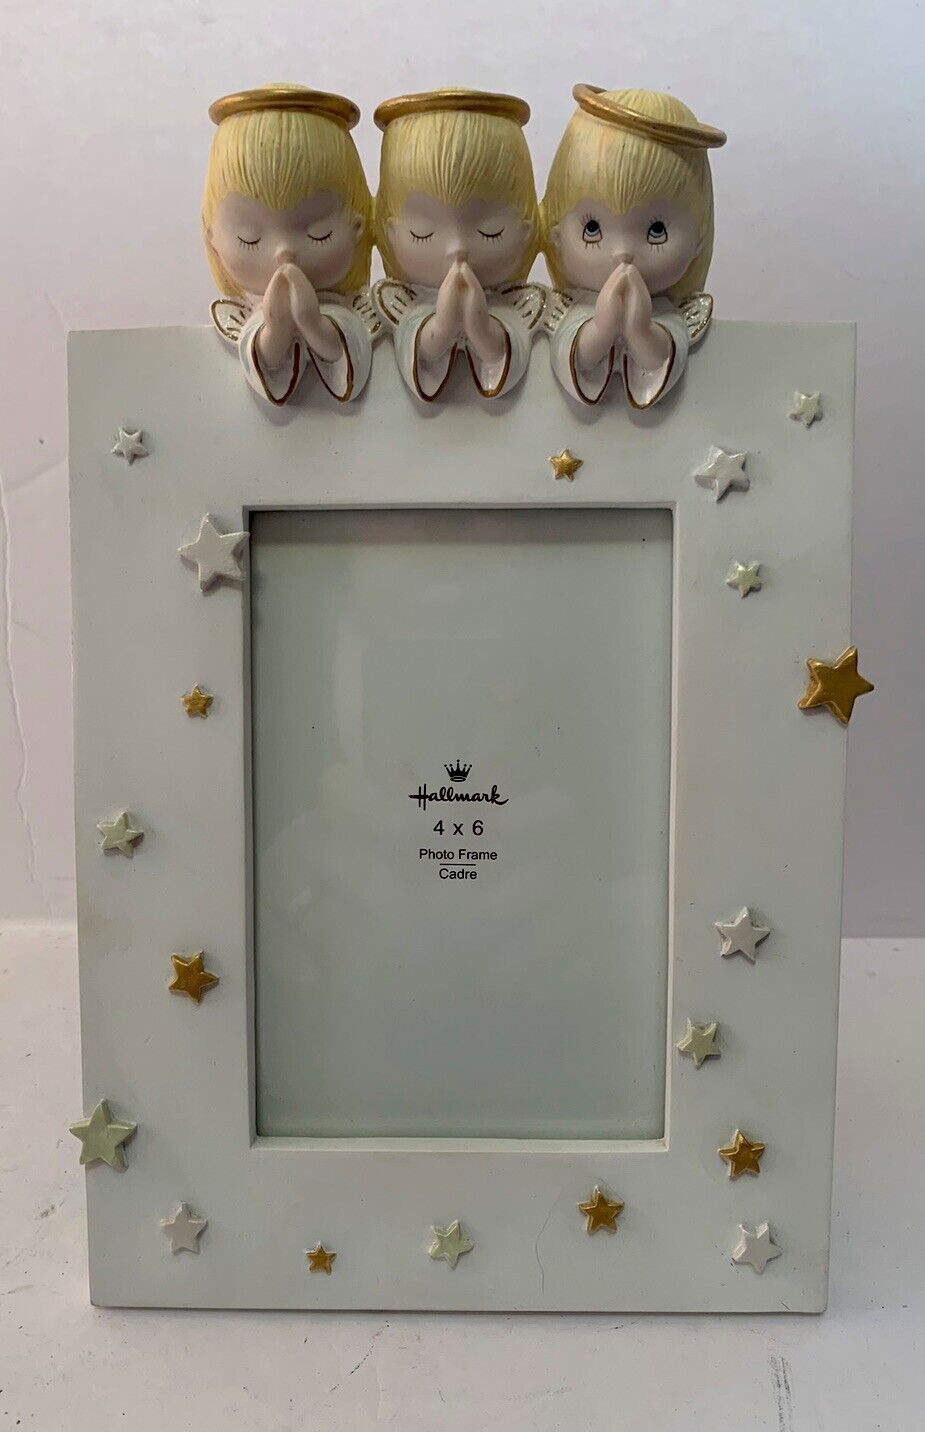 Hallmark Accents Mary’s Angels Photo Picture Frame 4x6” Photos Three Angels